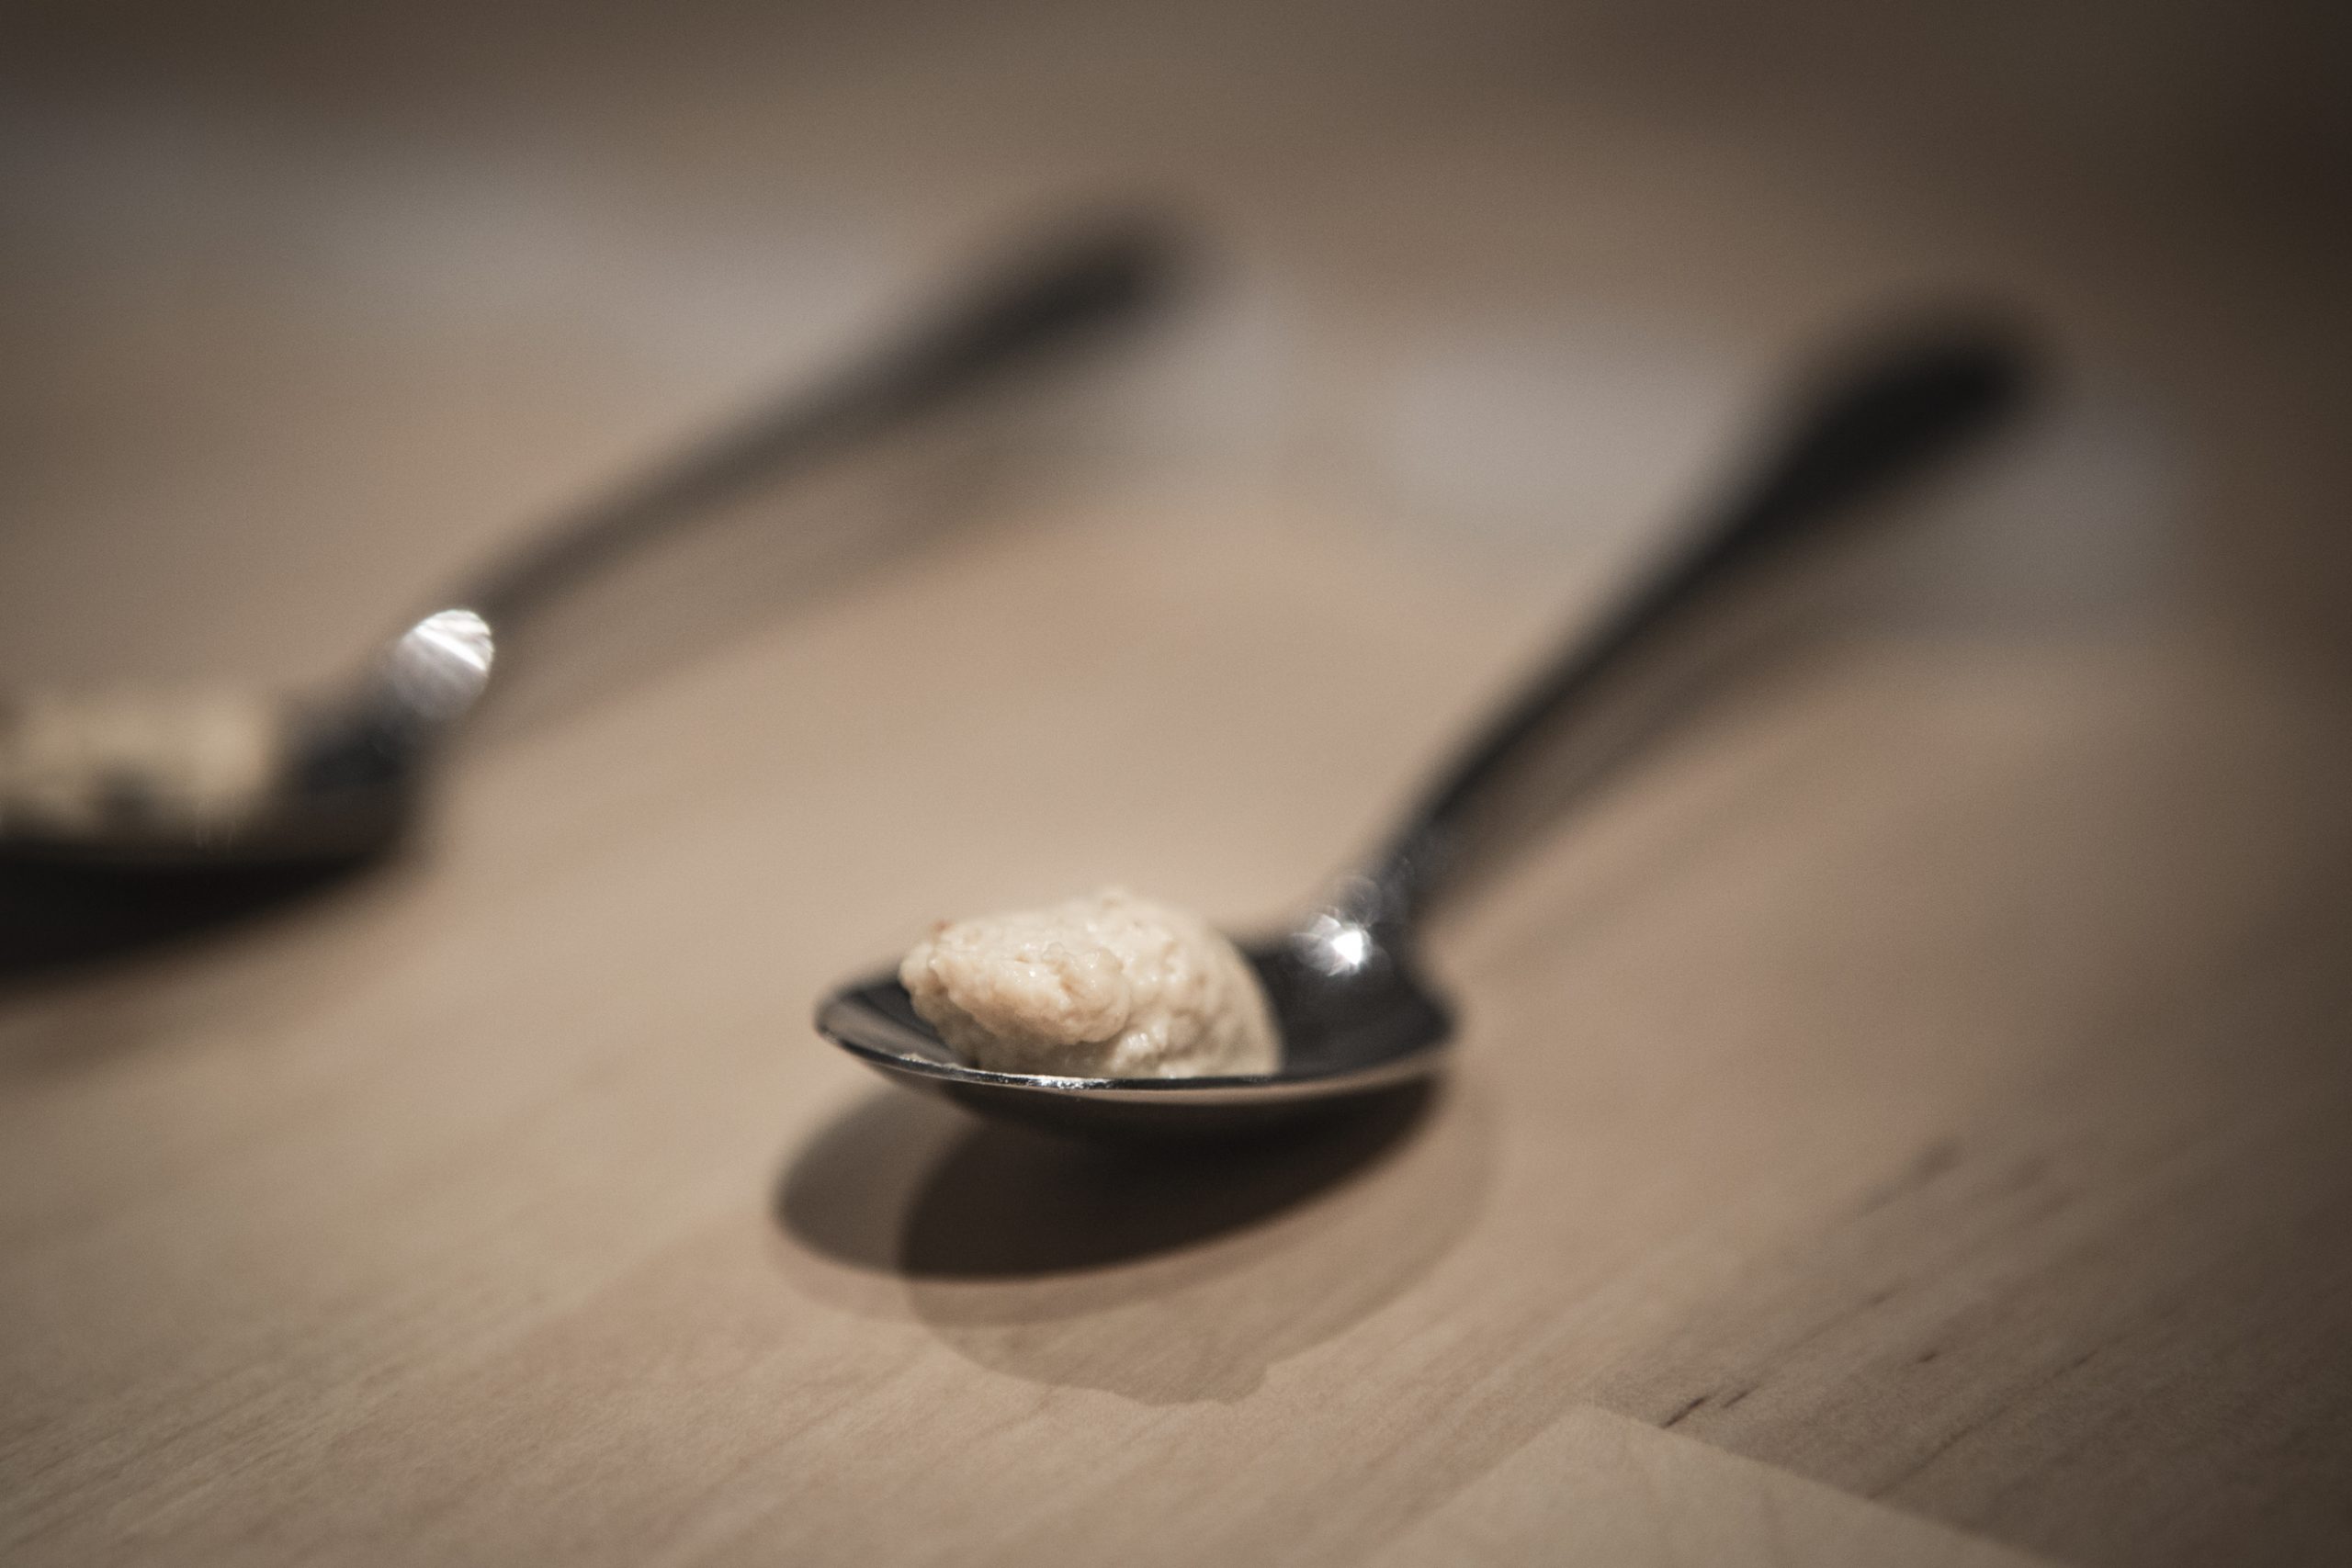 A closeup of the paste on a spoon.